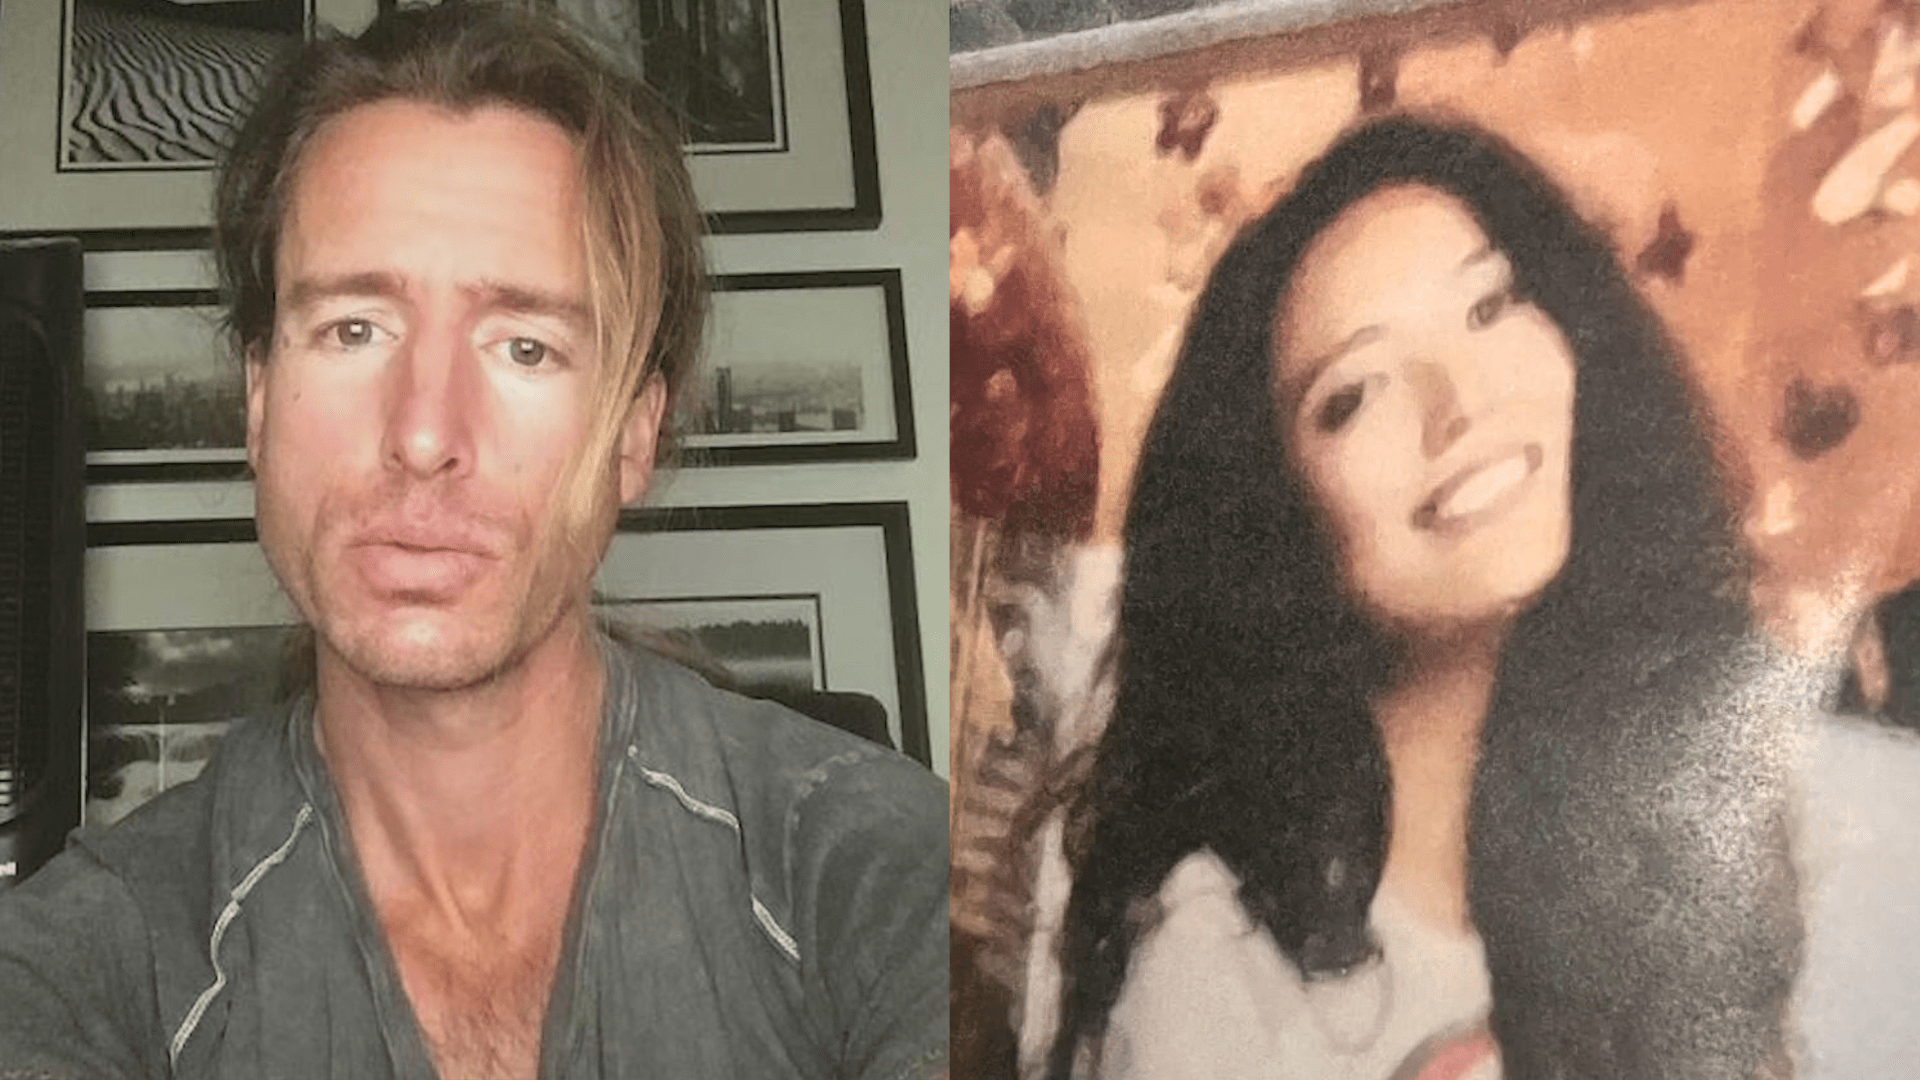 Samuel Bond Haskell IV, 35, is suspected of killing his wife, Mei Haskell, 37, after a torso was found in a dumpster in Encino on Nov. 8, 2023. (Samuel Haskell/Los Angeles Police Department)